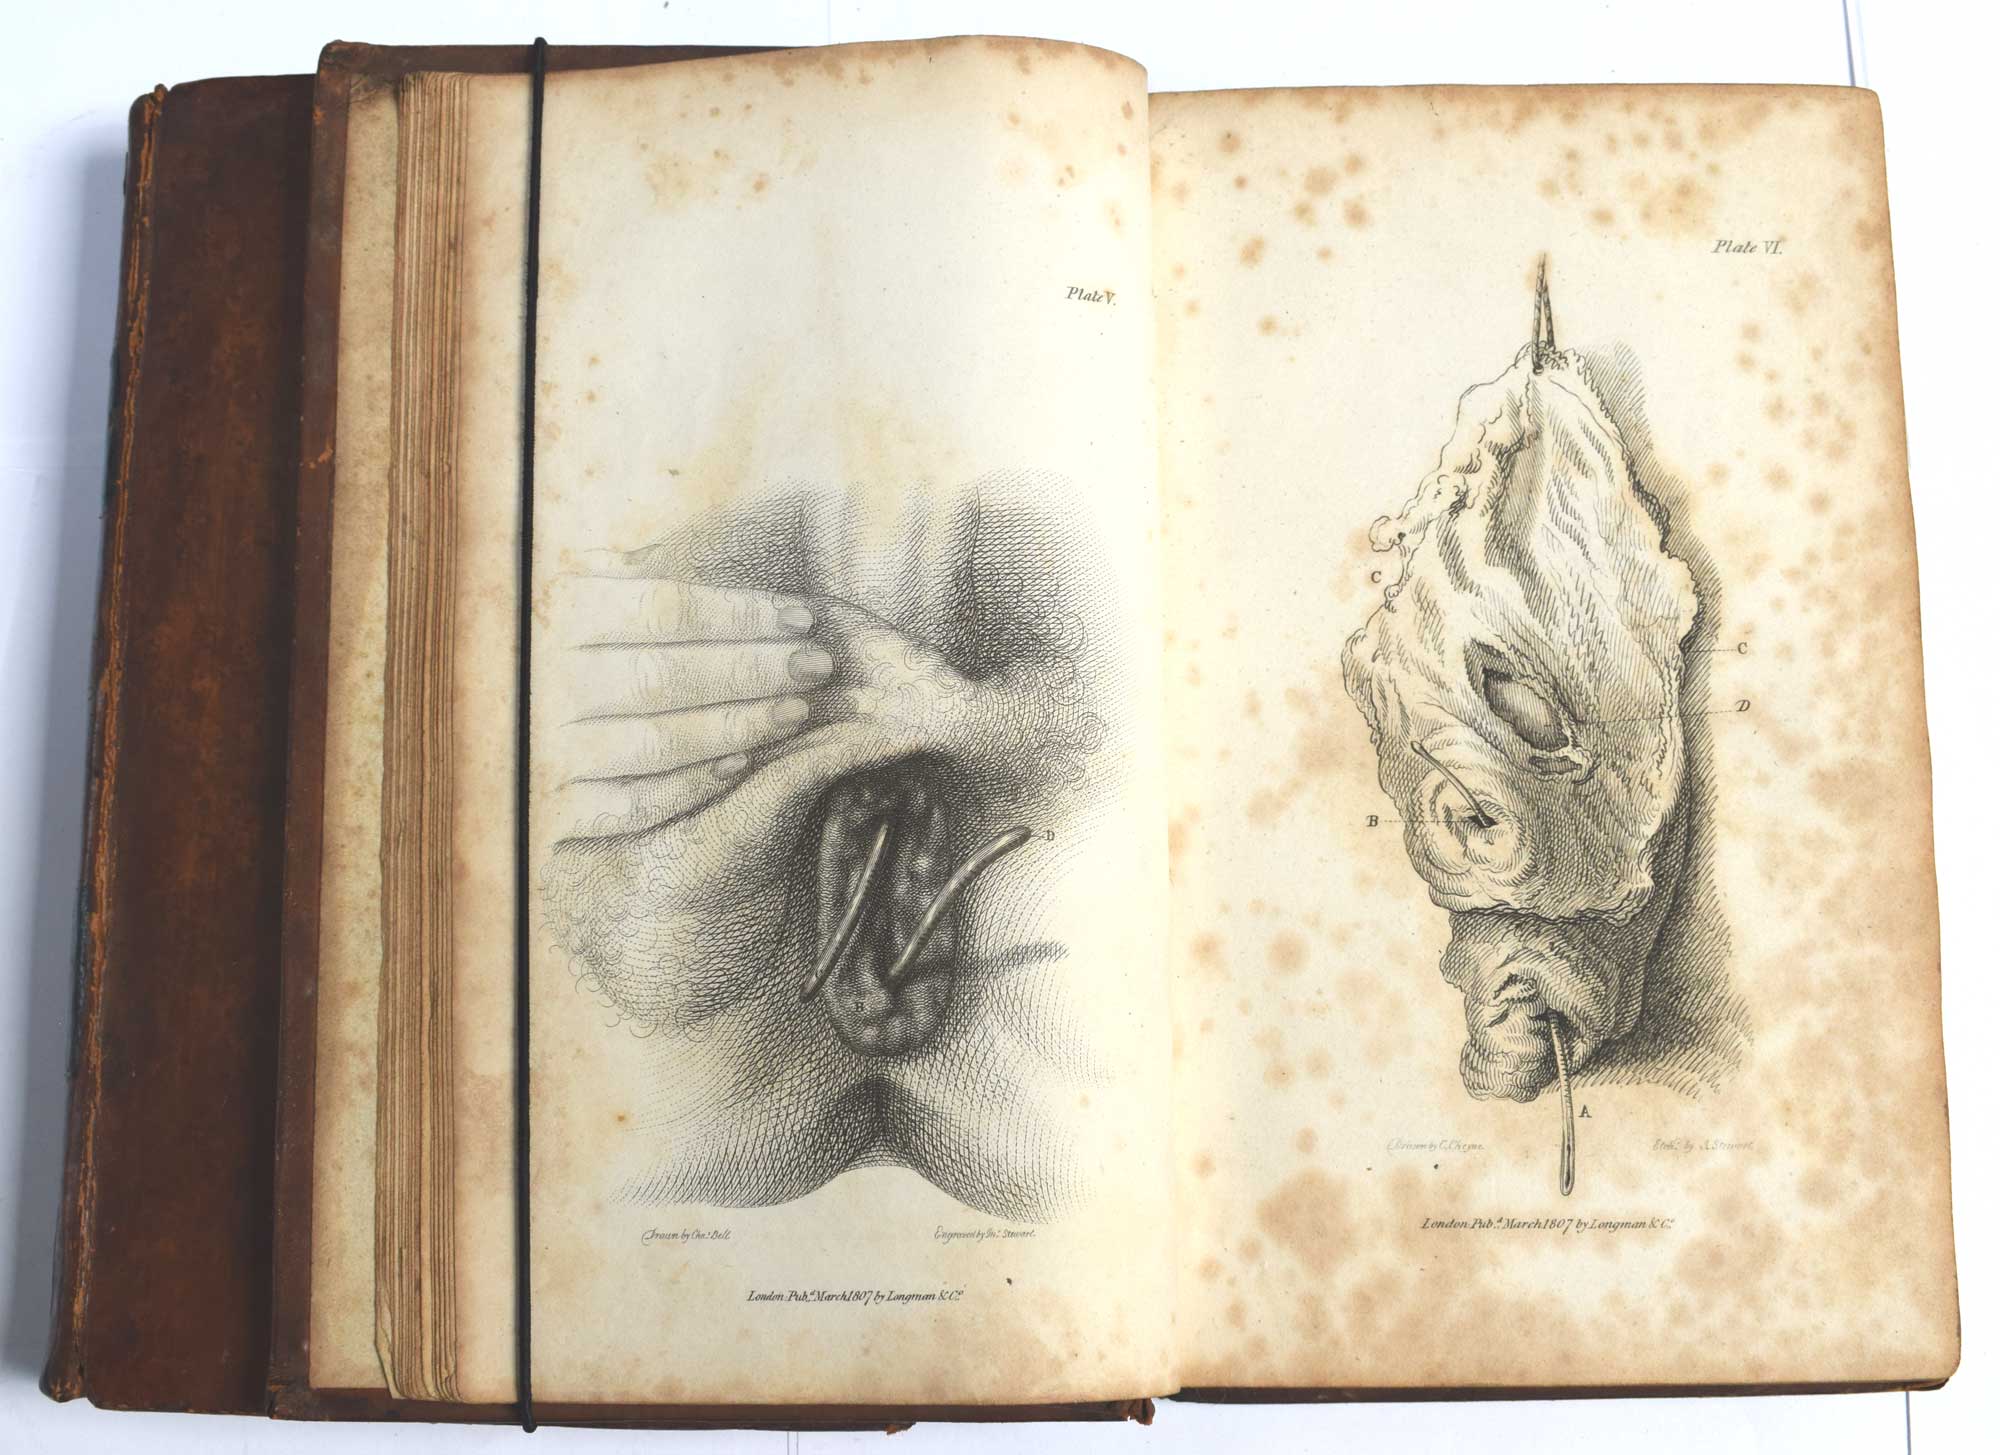 A System of Operative Surgery, Founded on the Basis of Anatomy. 2 Volume set.